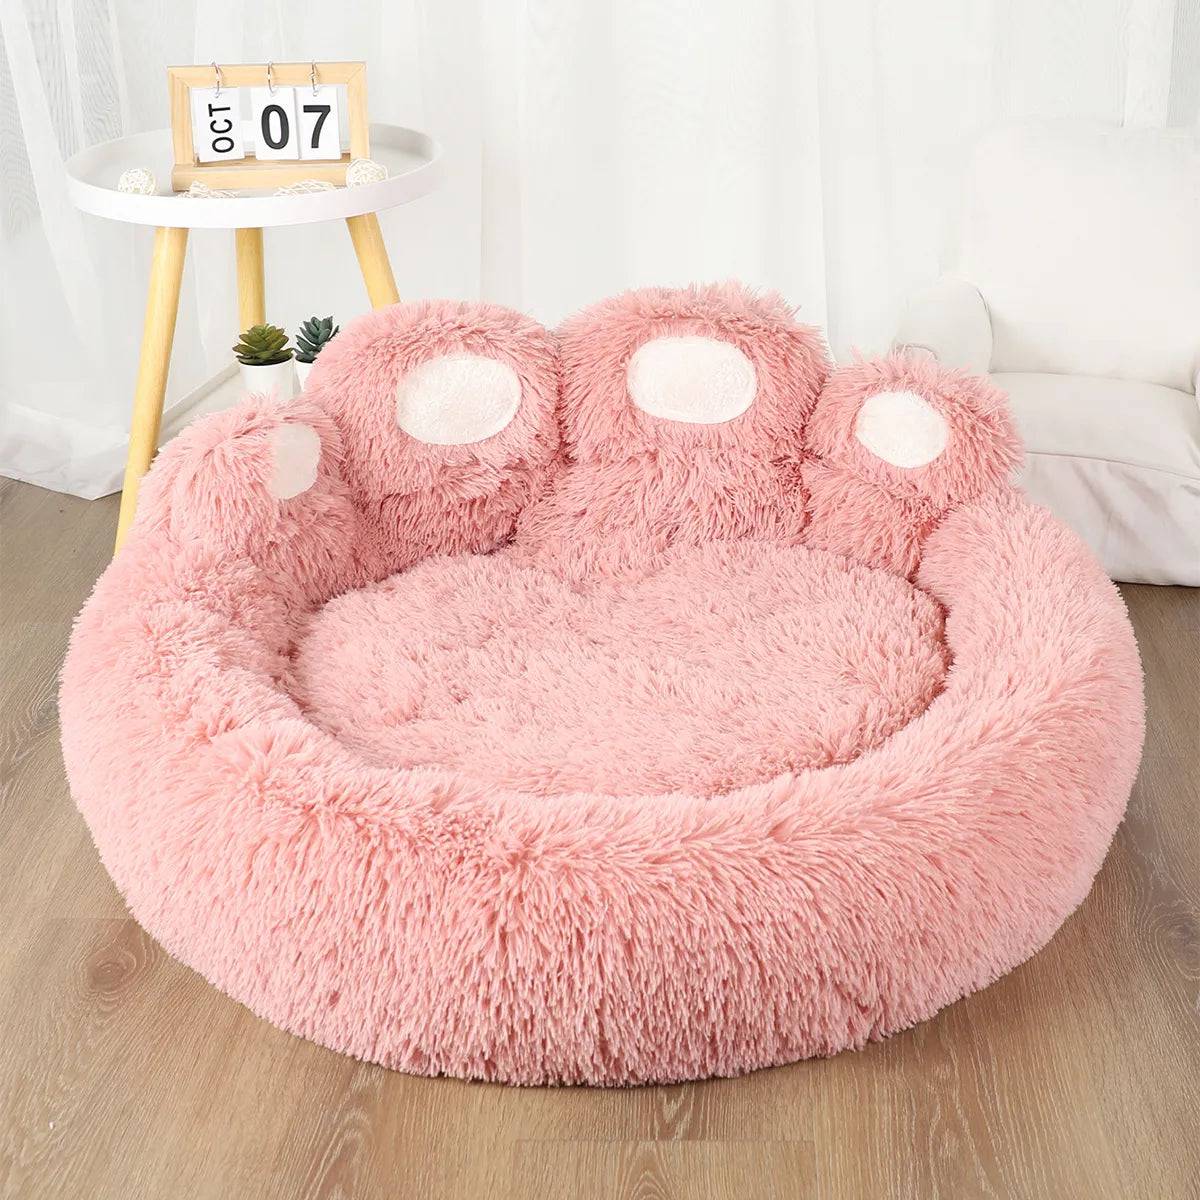 Fluffy Dog Bed: The Perfect Place for Your Furry Friend to Relax Pink / 50cm - IHavePaws